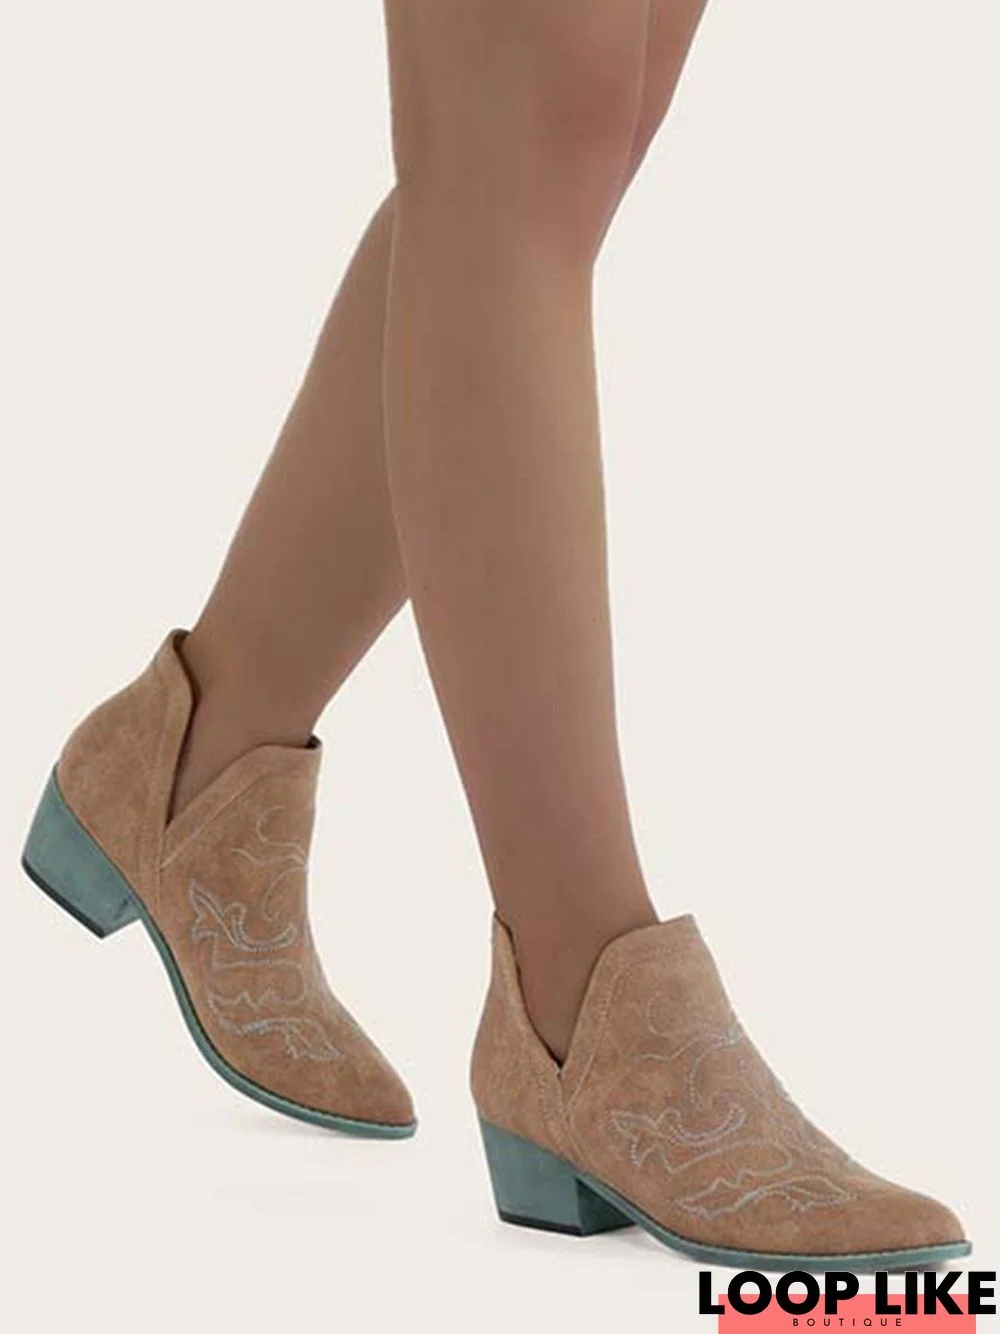 Khaki Suede Western Ankle Boots with Embroidered Graphics